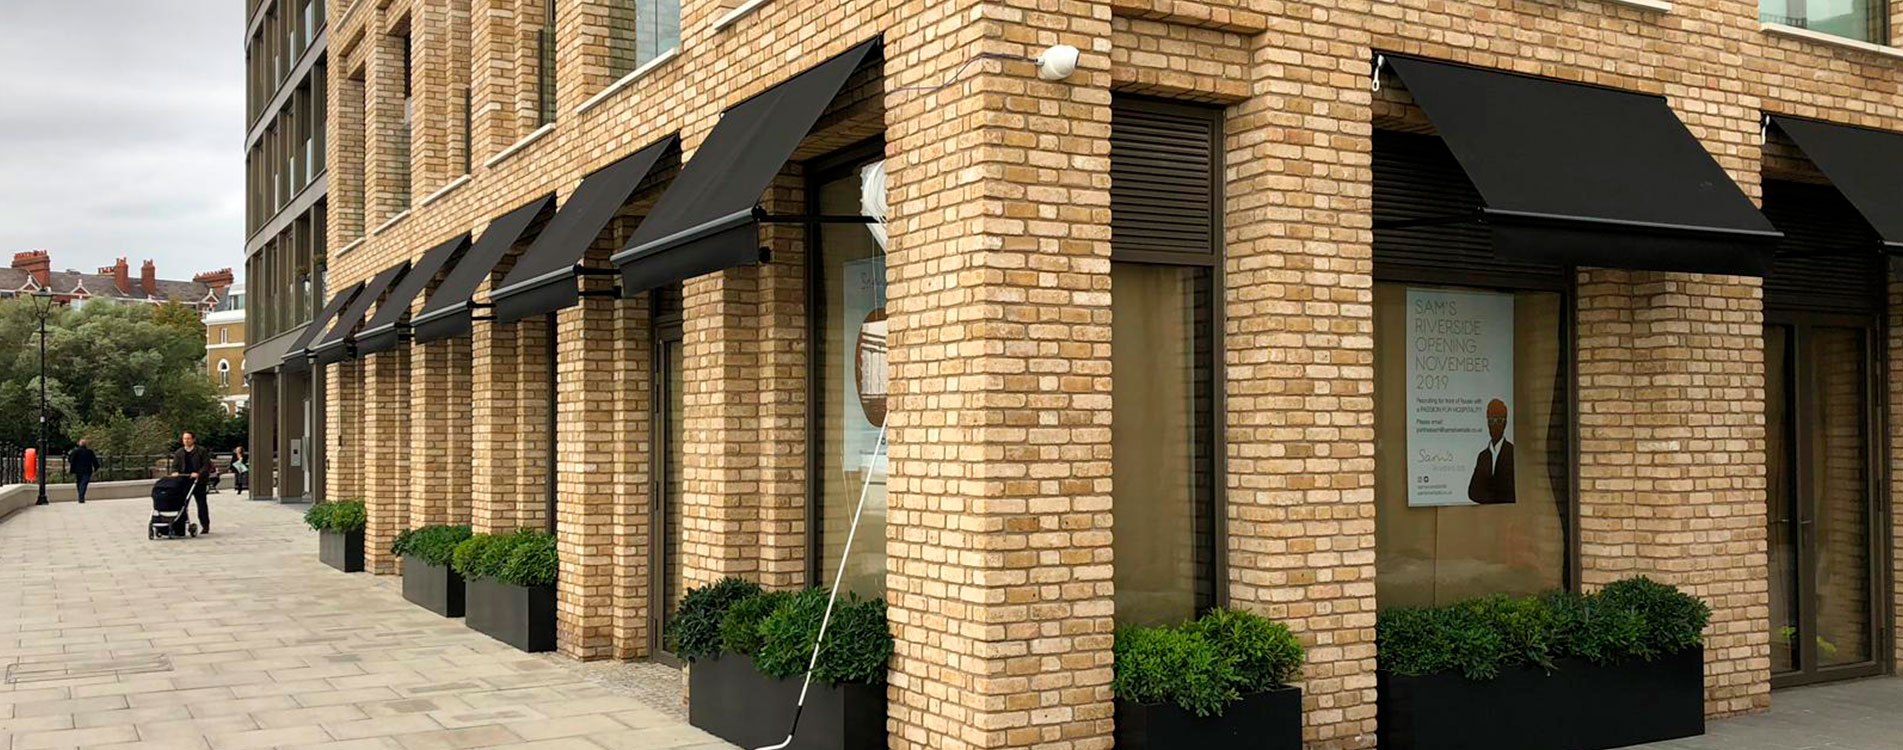 Chelsea Drop Arm Commercial Awnings